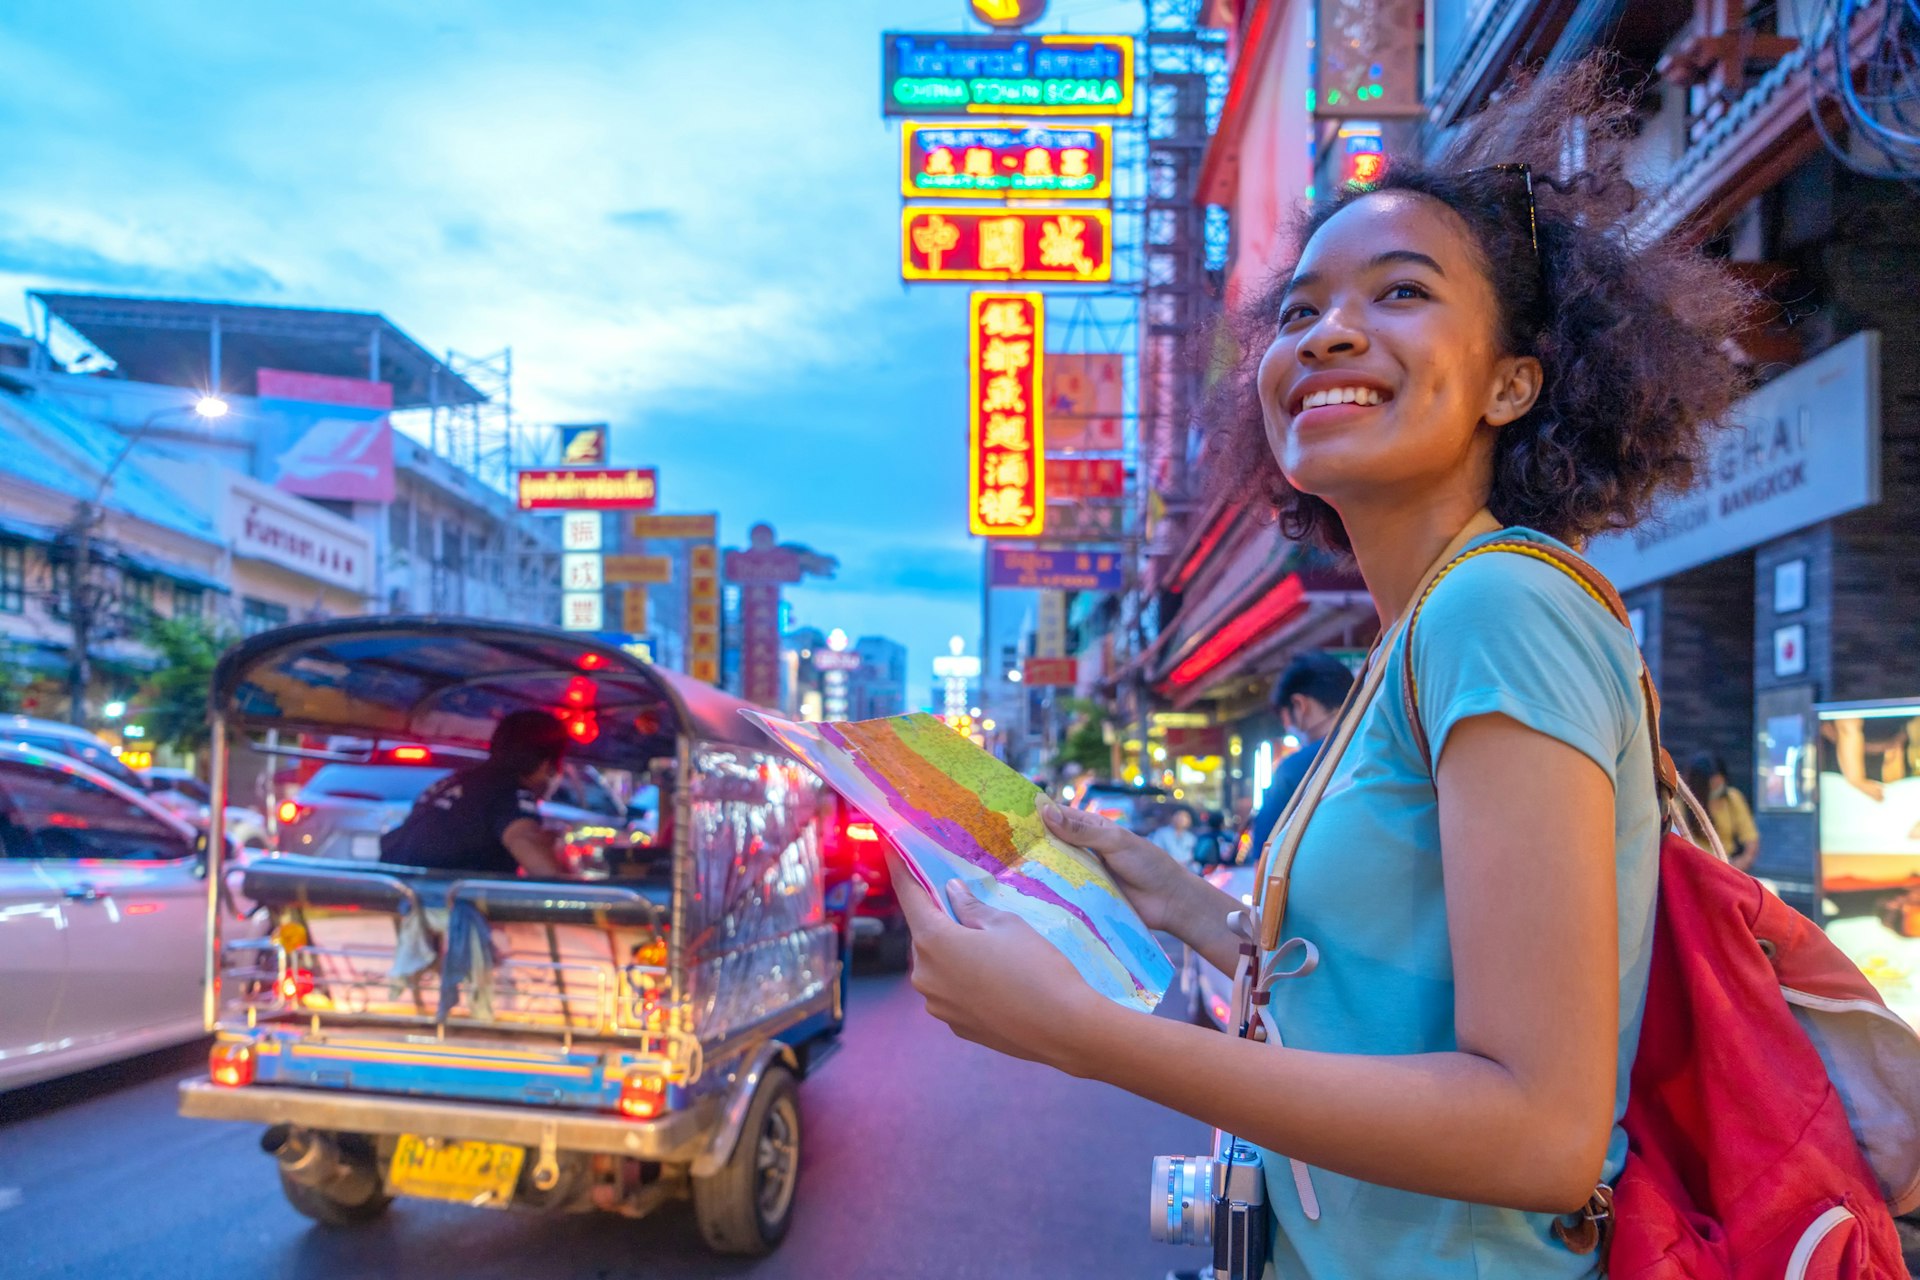 A young woman holding a map and smiling on a busy street in Bangkok, Thailand